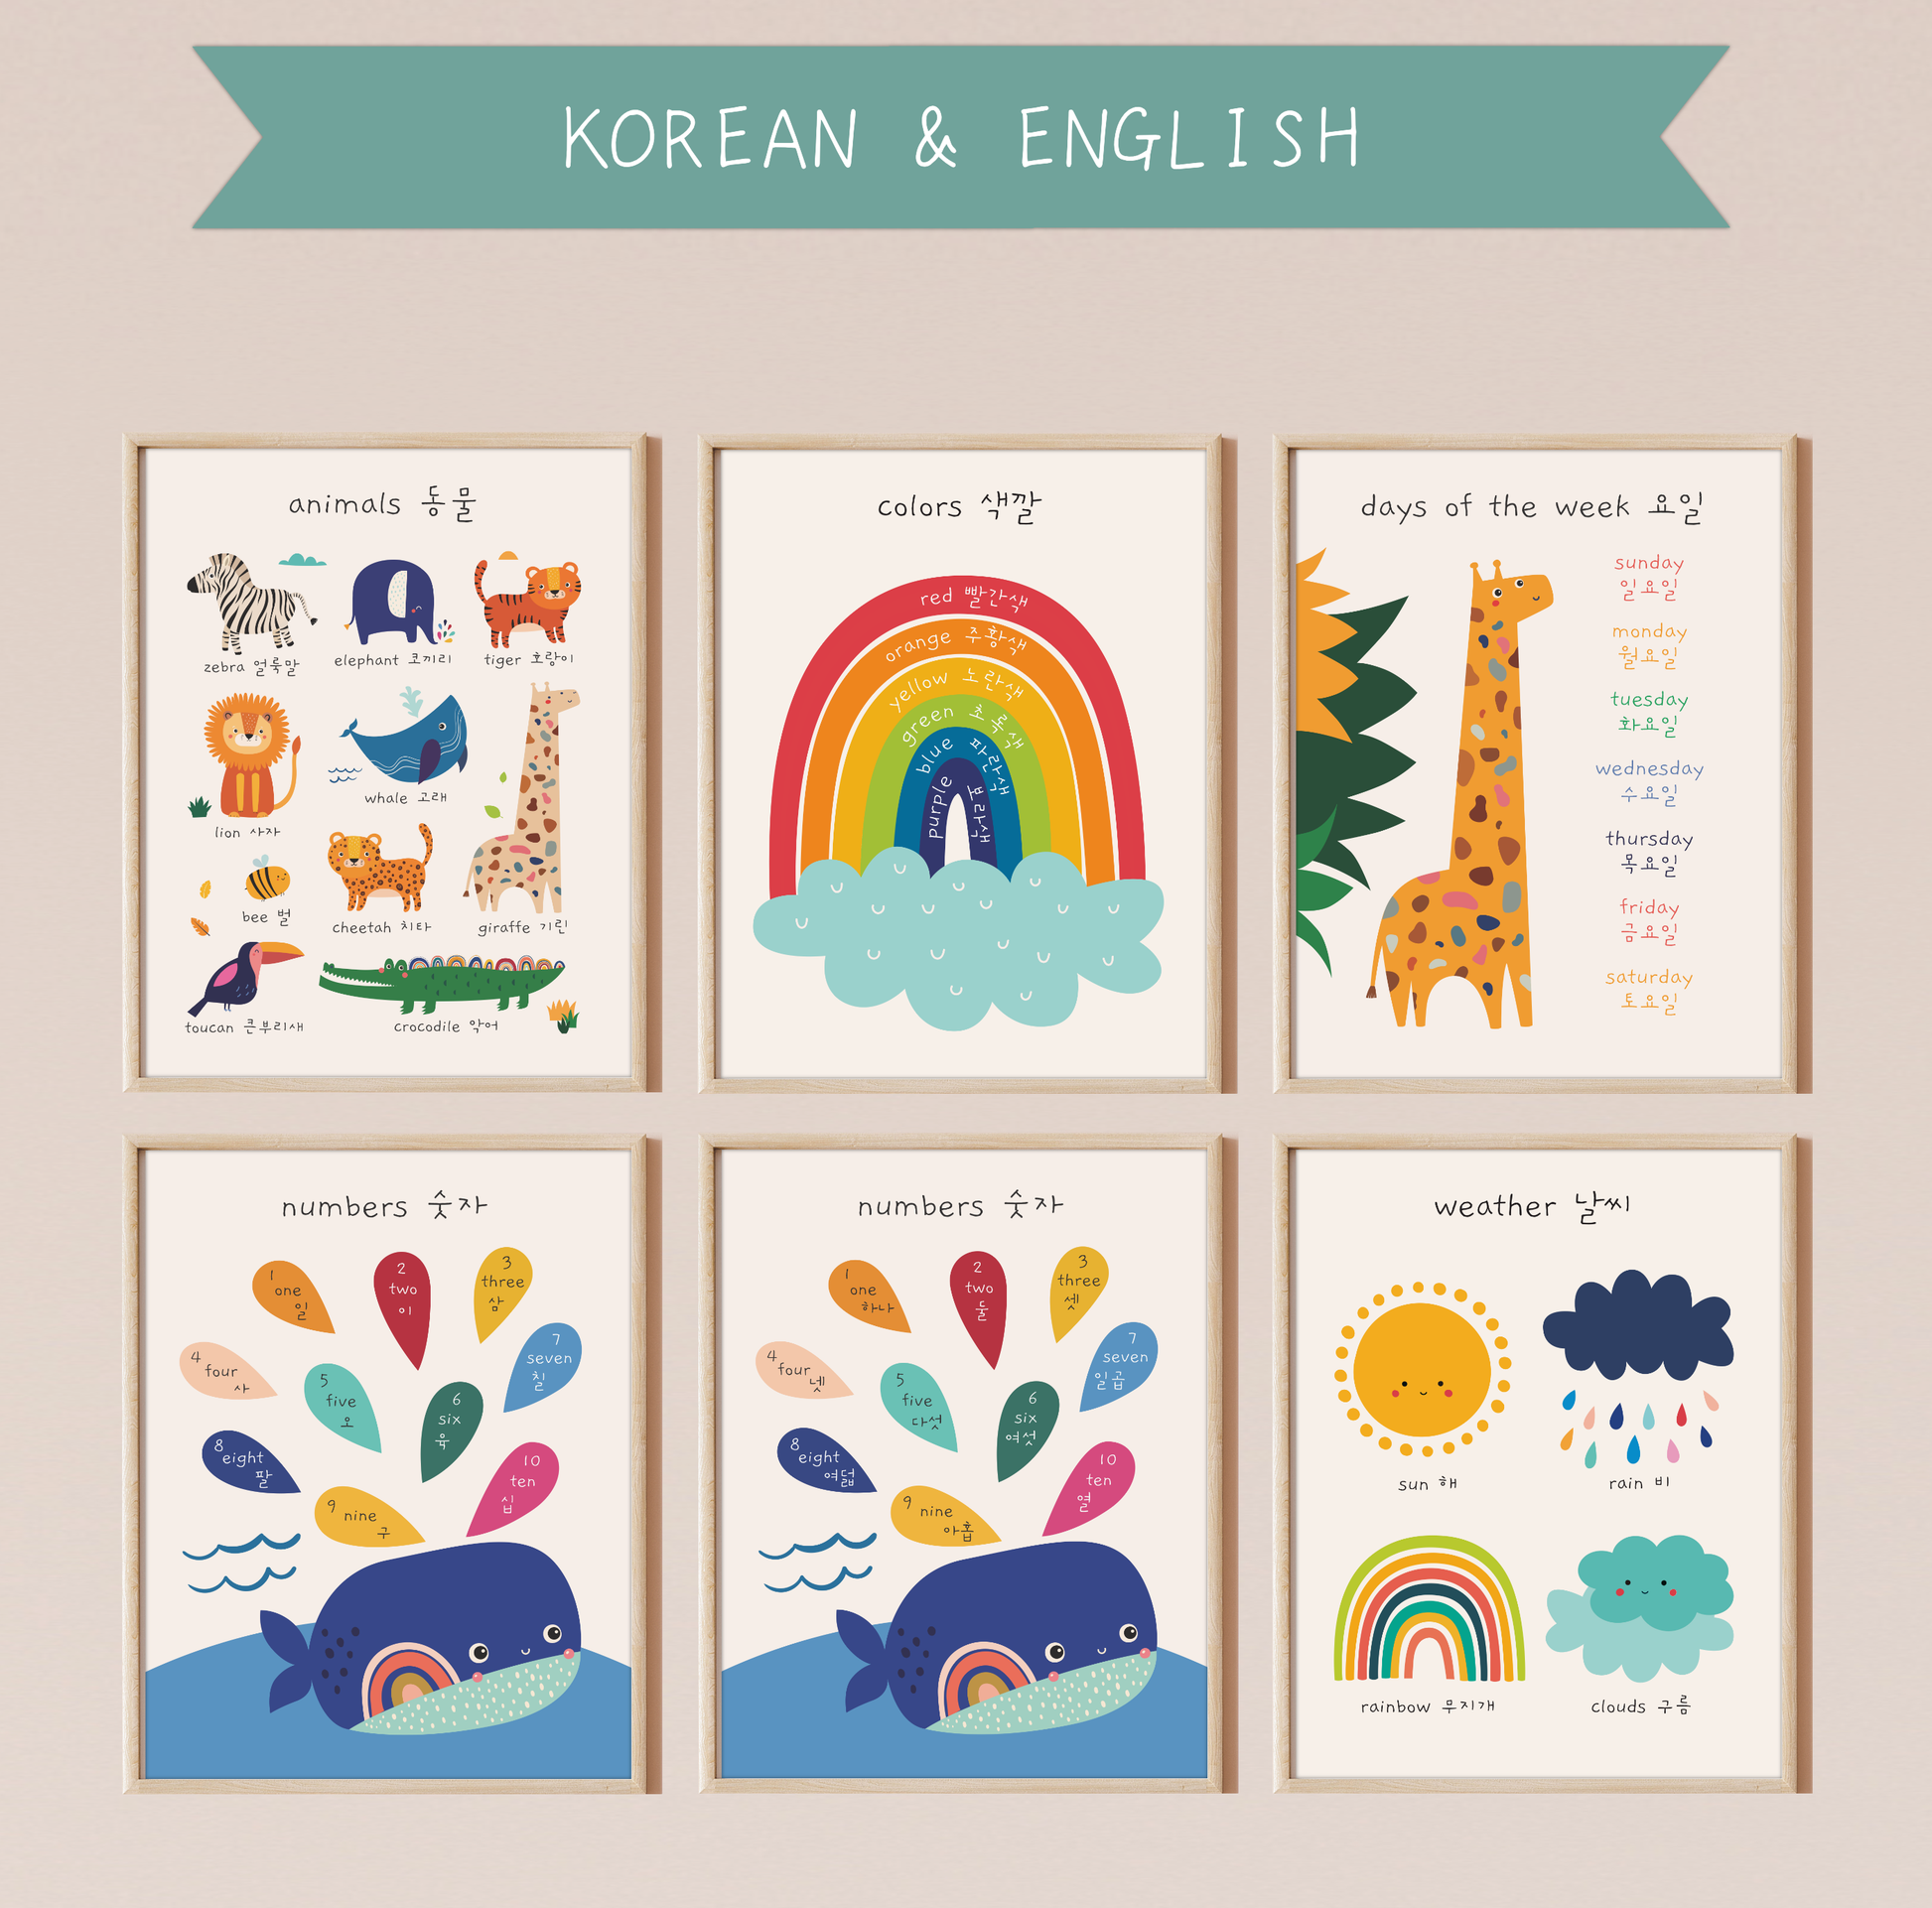 Five bilingual educational prints framed in light oak hanging on a pinkish wall featuring cute, colorful illustrations of animals, colors, days of the week, numbers and the weather labeled in English and Korean. This bilingual display aids in language acquisition and cross-cultural learning and has the perfect aesthetic for a baby nursery, classroom, or other decor. 